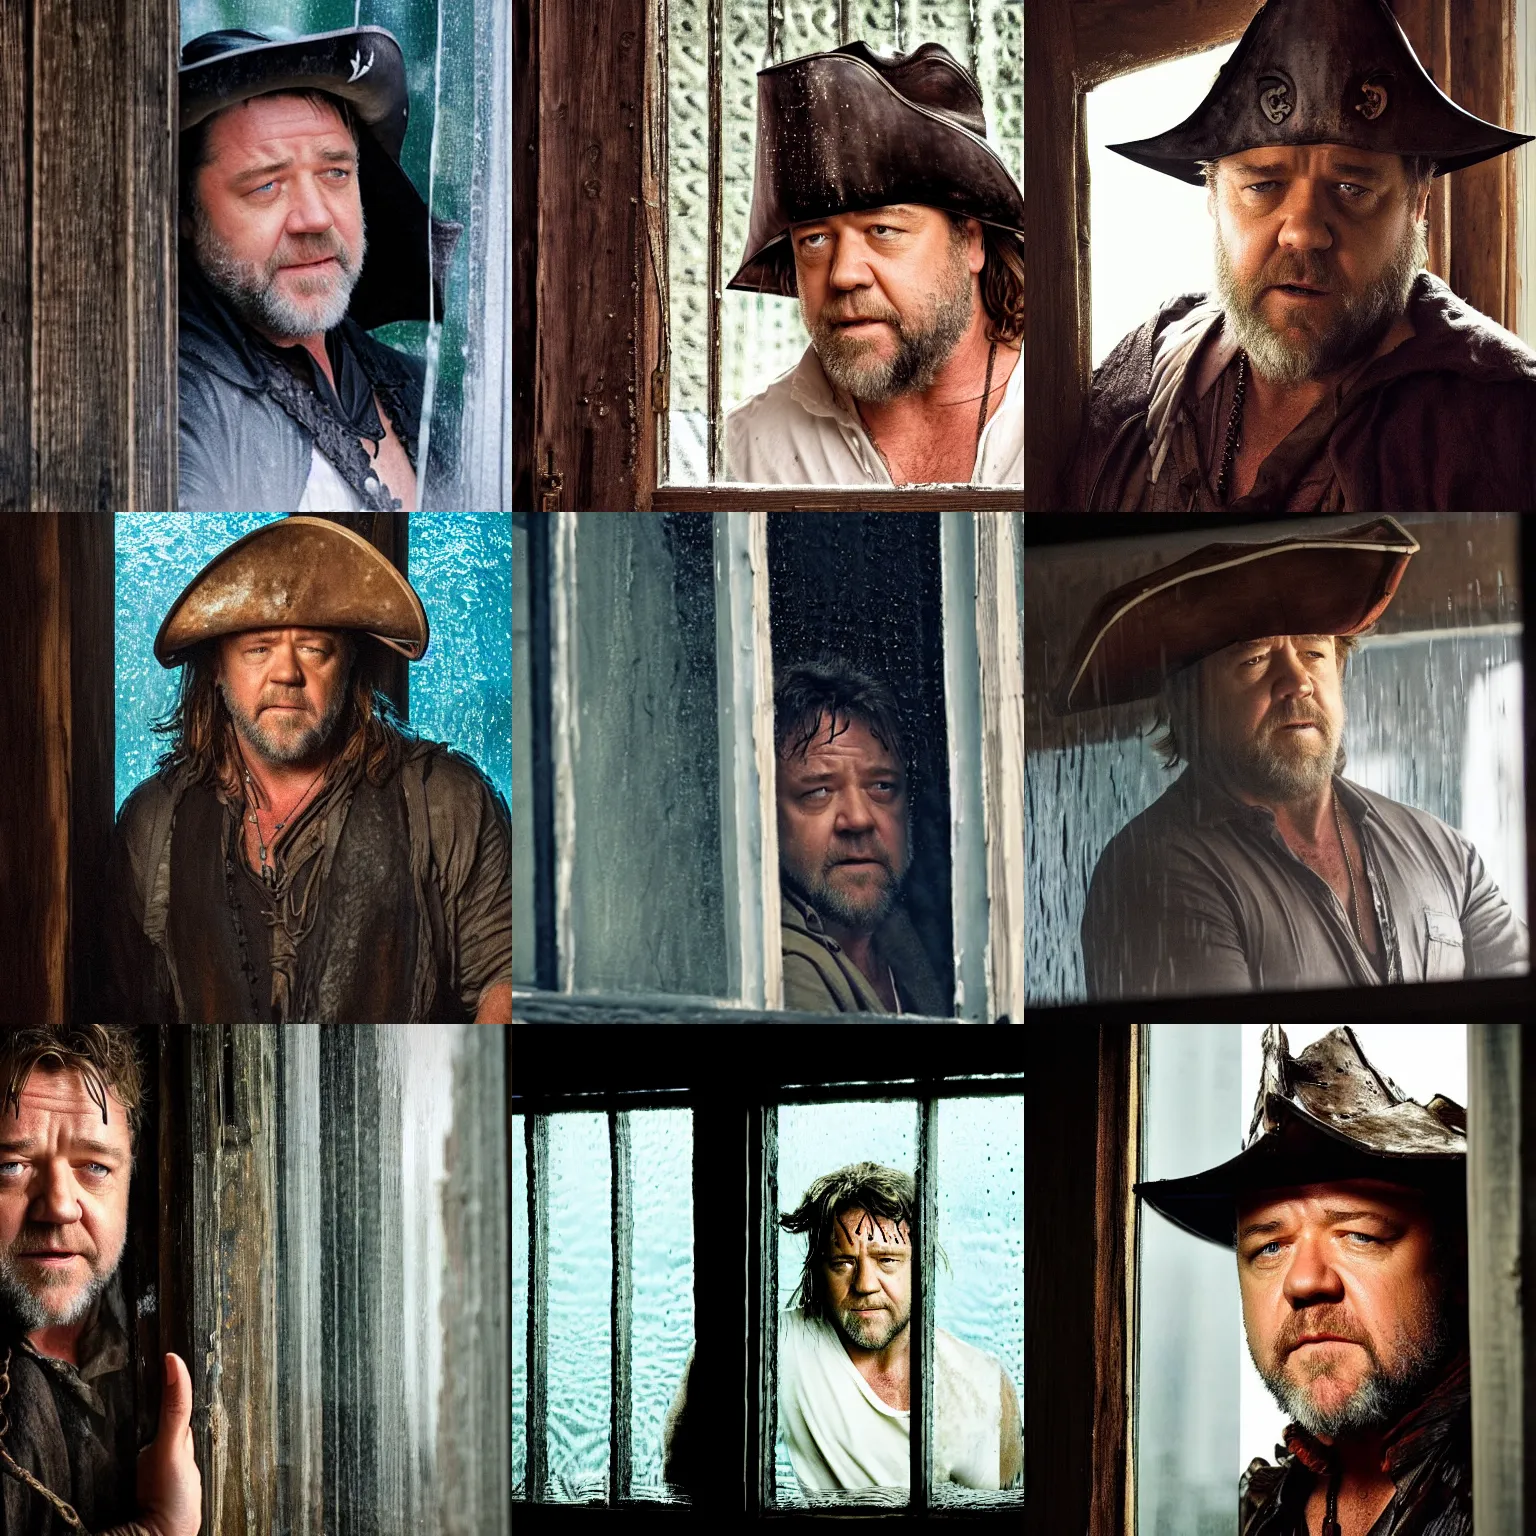 Prompt: russell crowe wearing a giant pirate hat behind a rainy dirty window and wooden wall peering out to the camera